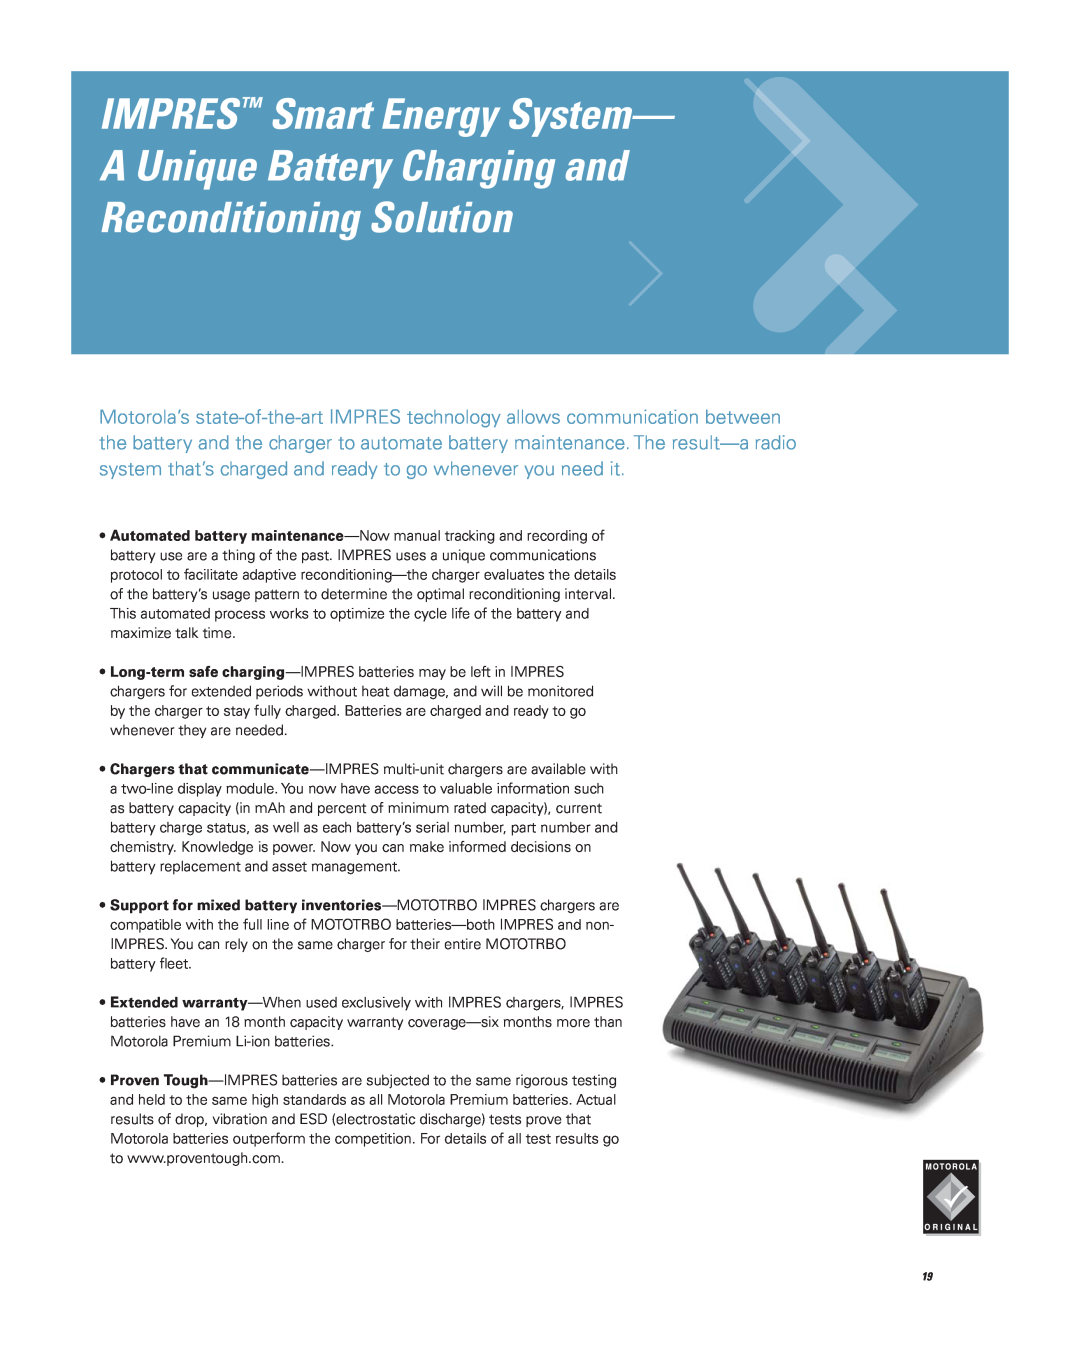 Motorola Professional Digital Two-Way Radio System brochure IMPRES Smart Energy System A Unique Battery Charging and 